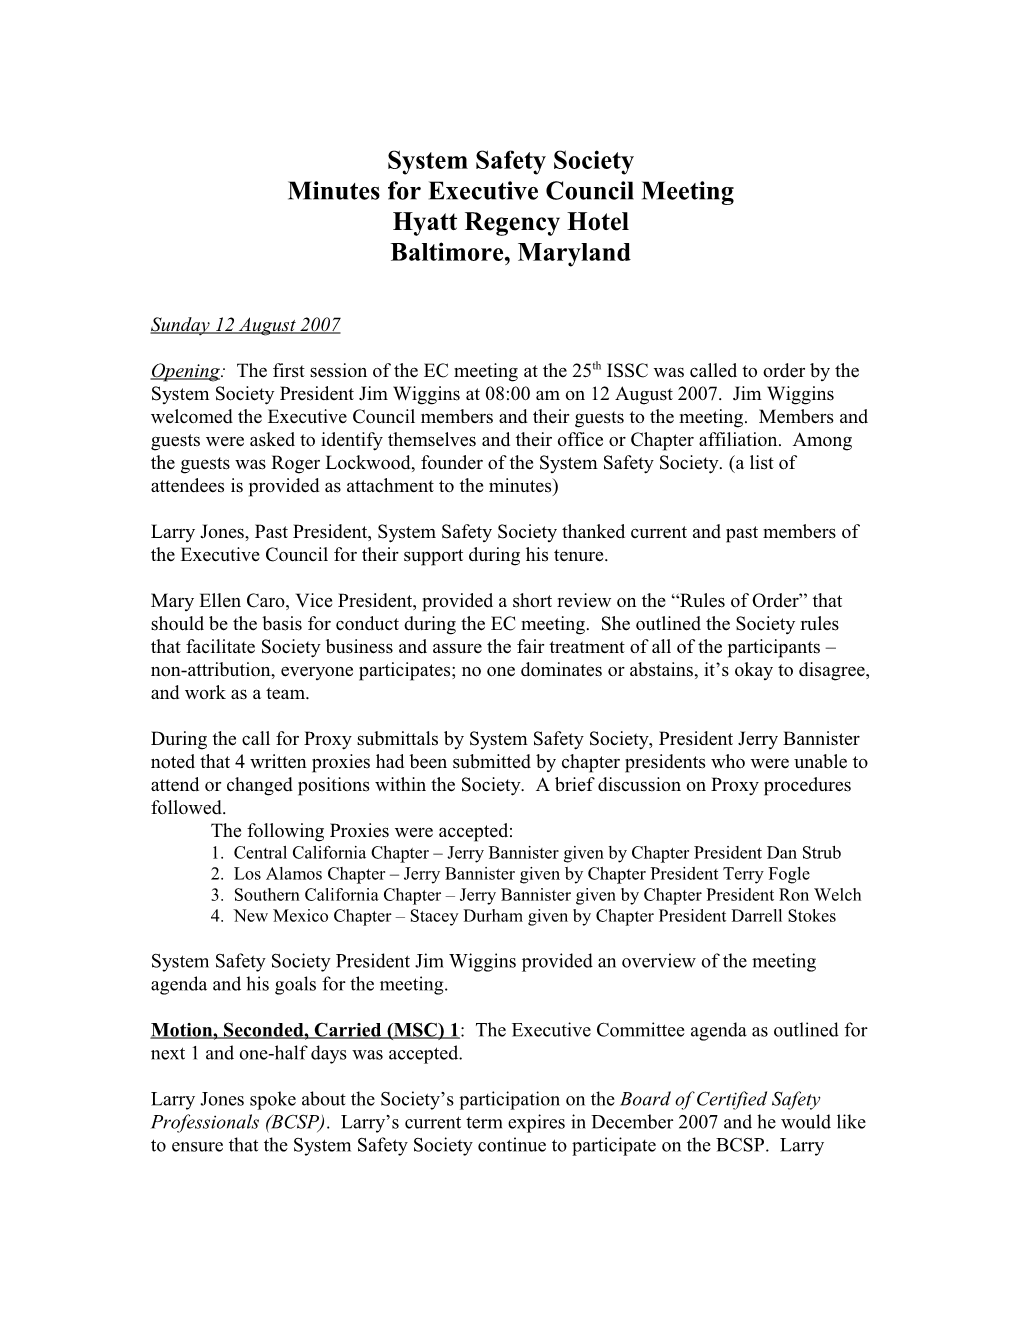 Minutes for Executive Council Meeting